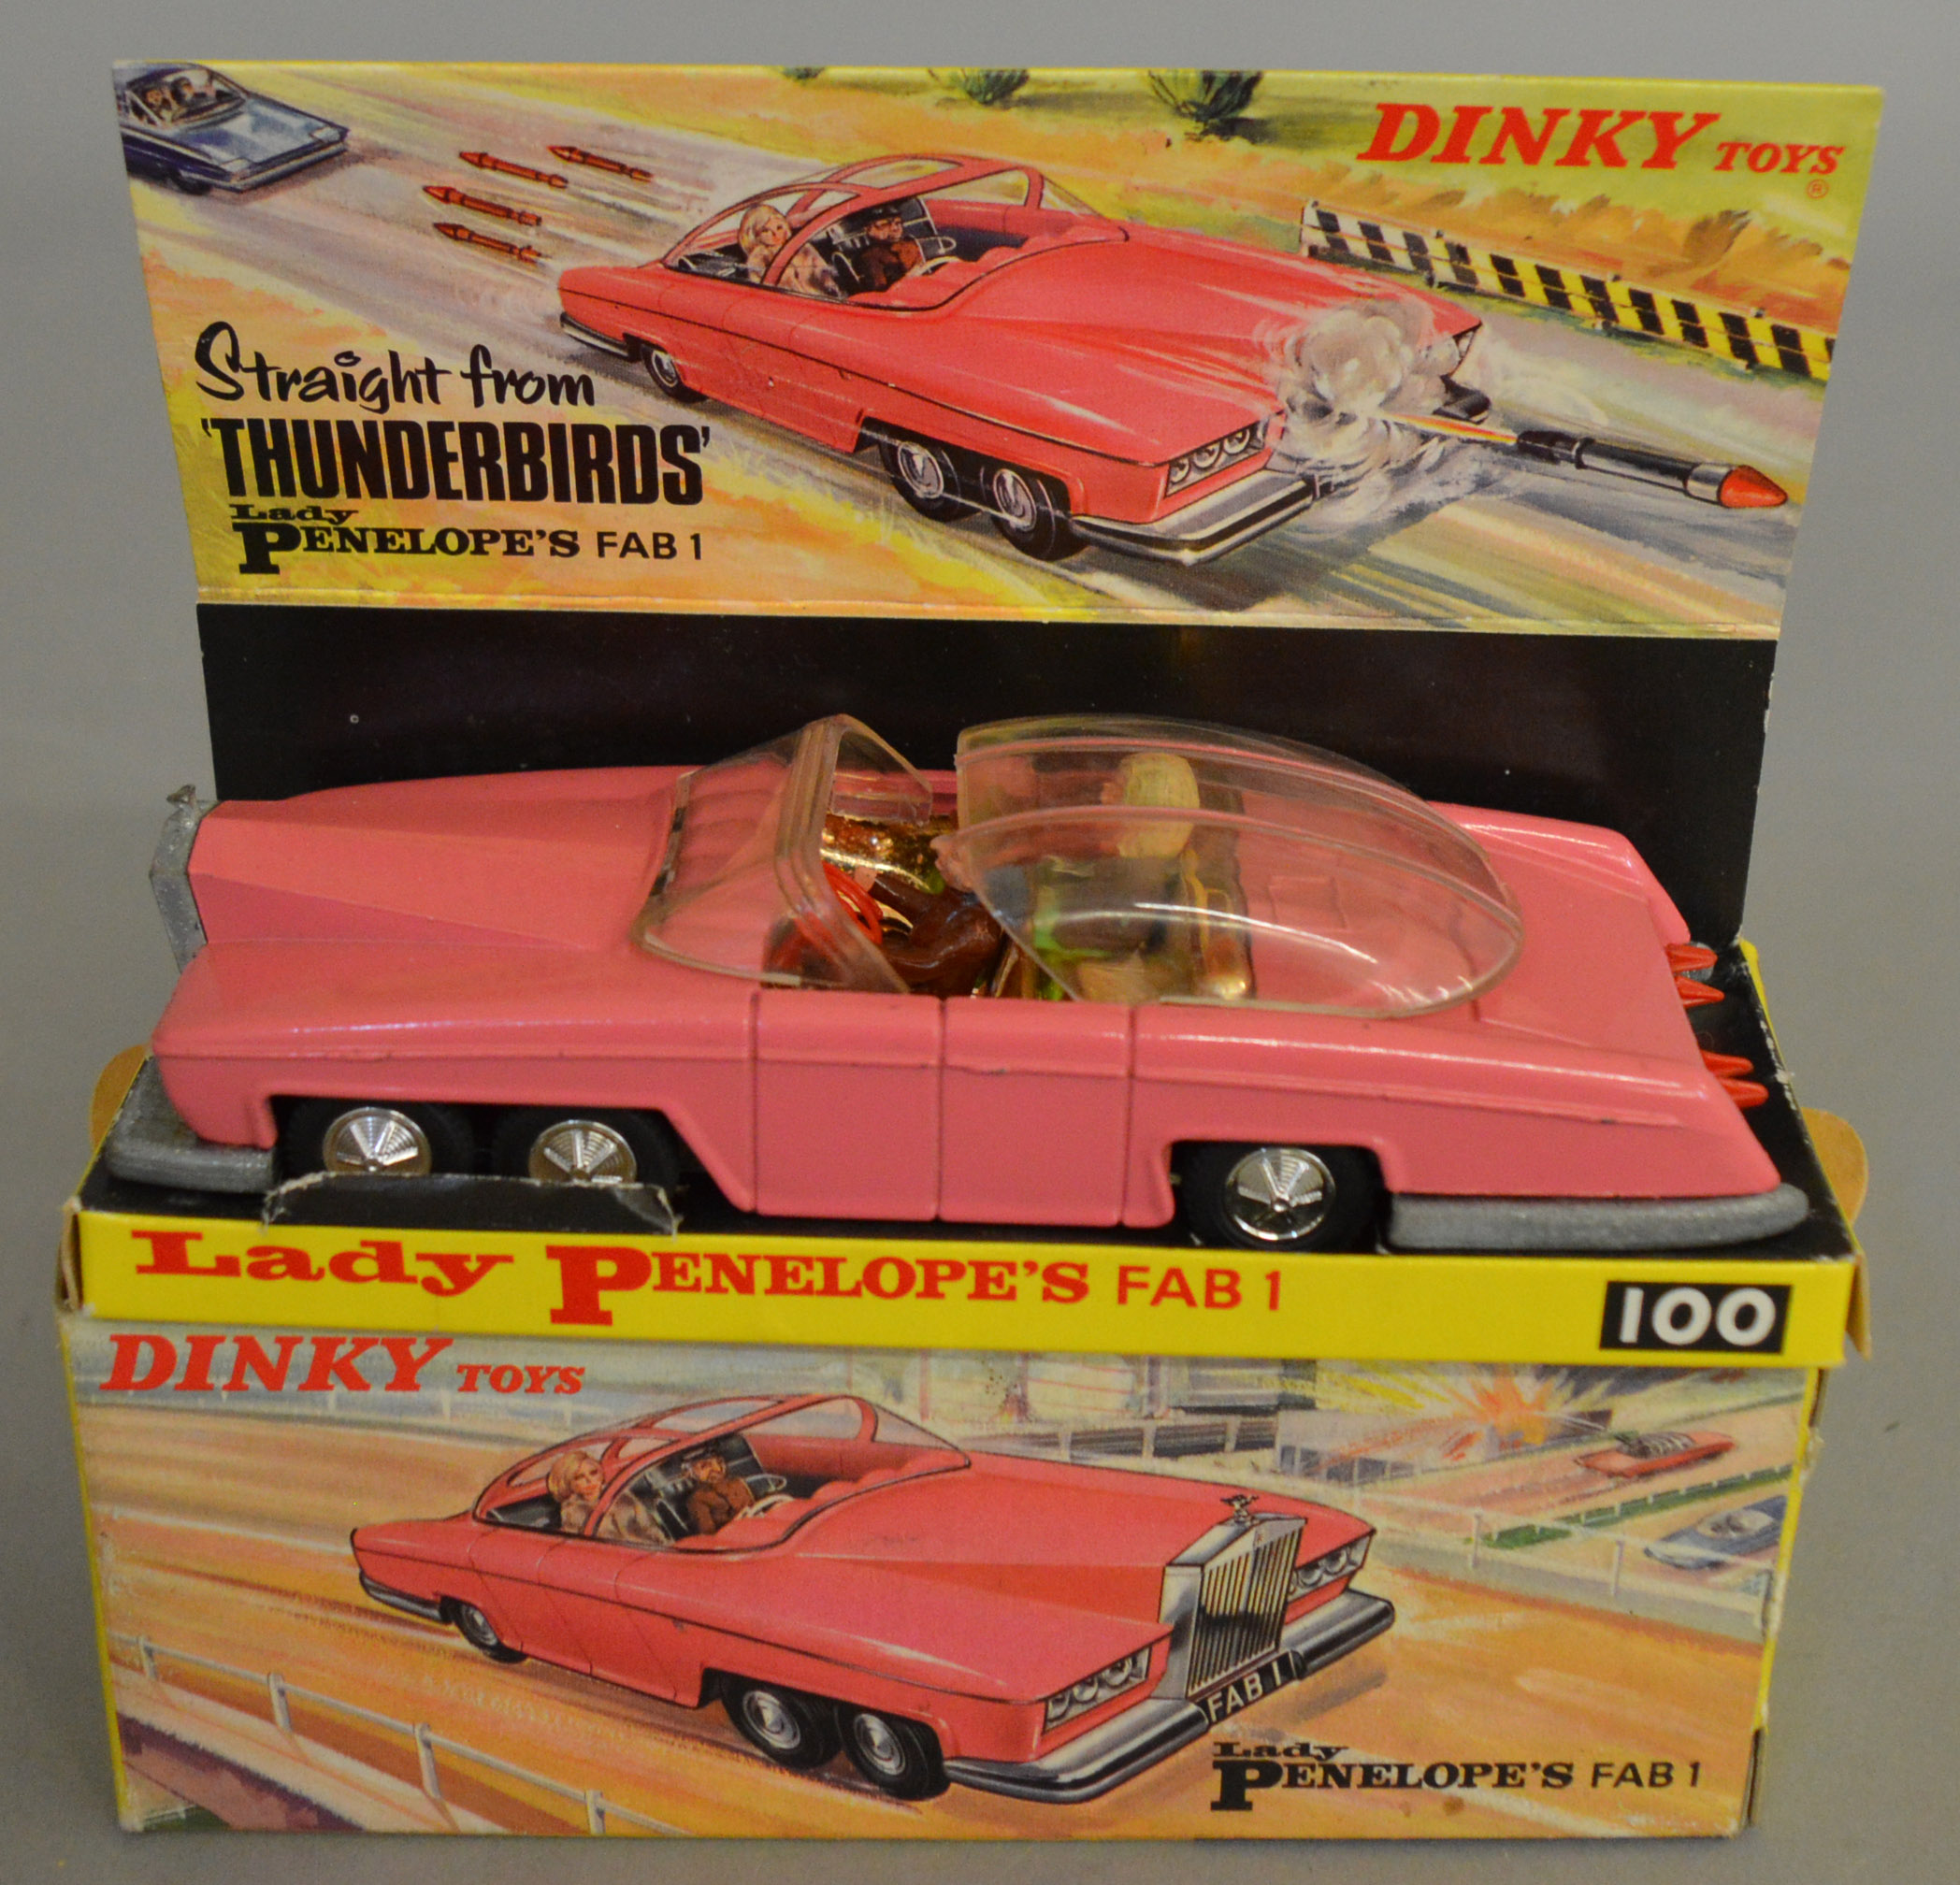 A Dinky Toys 100 Lady Penelope's FAB 1, containing Parker and Lady Penelope figures, with four